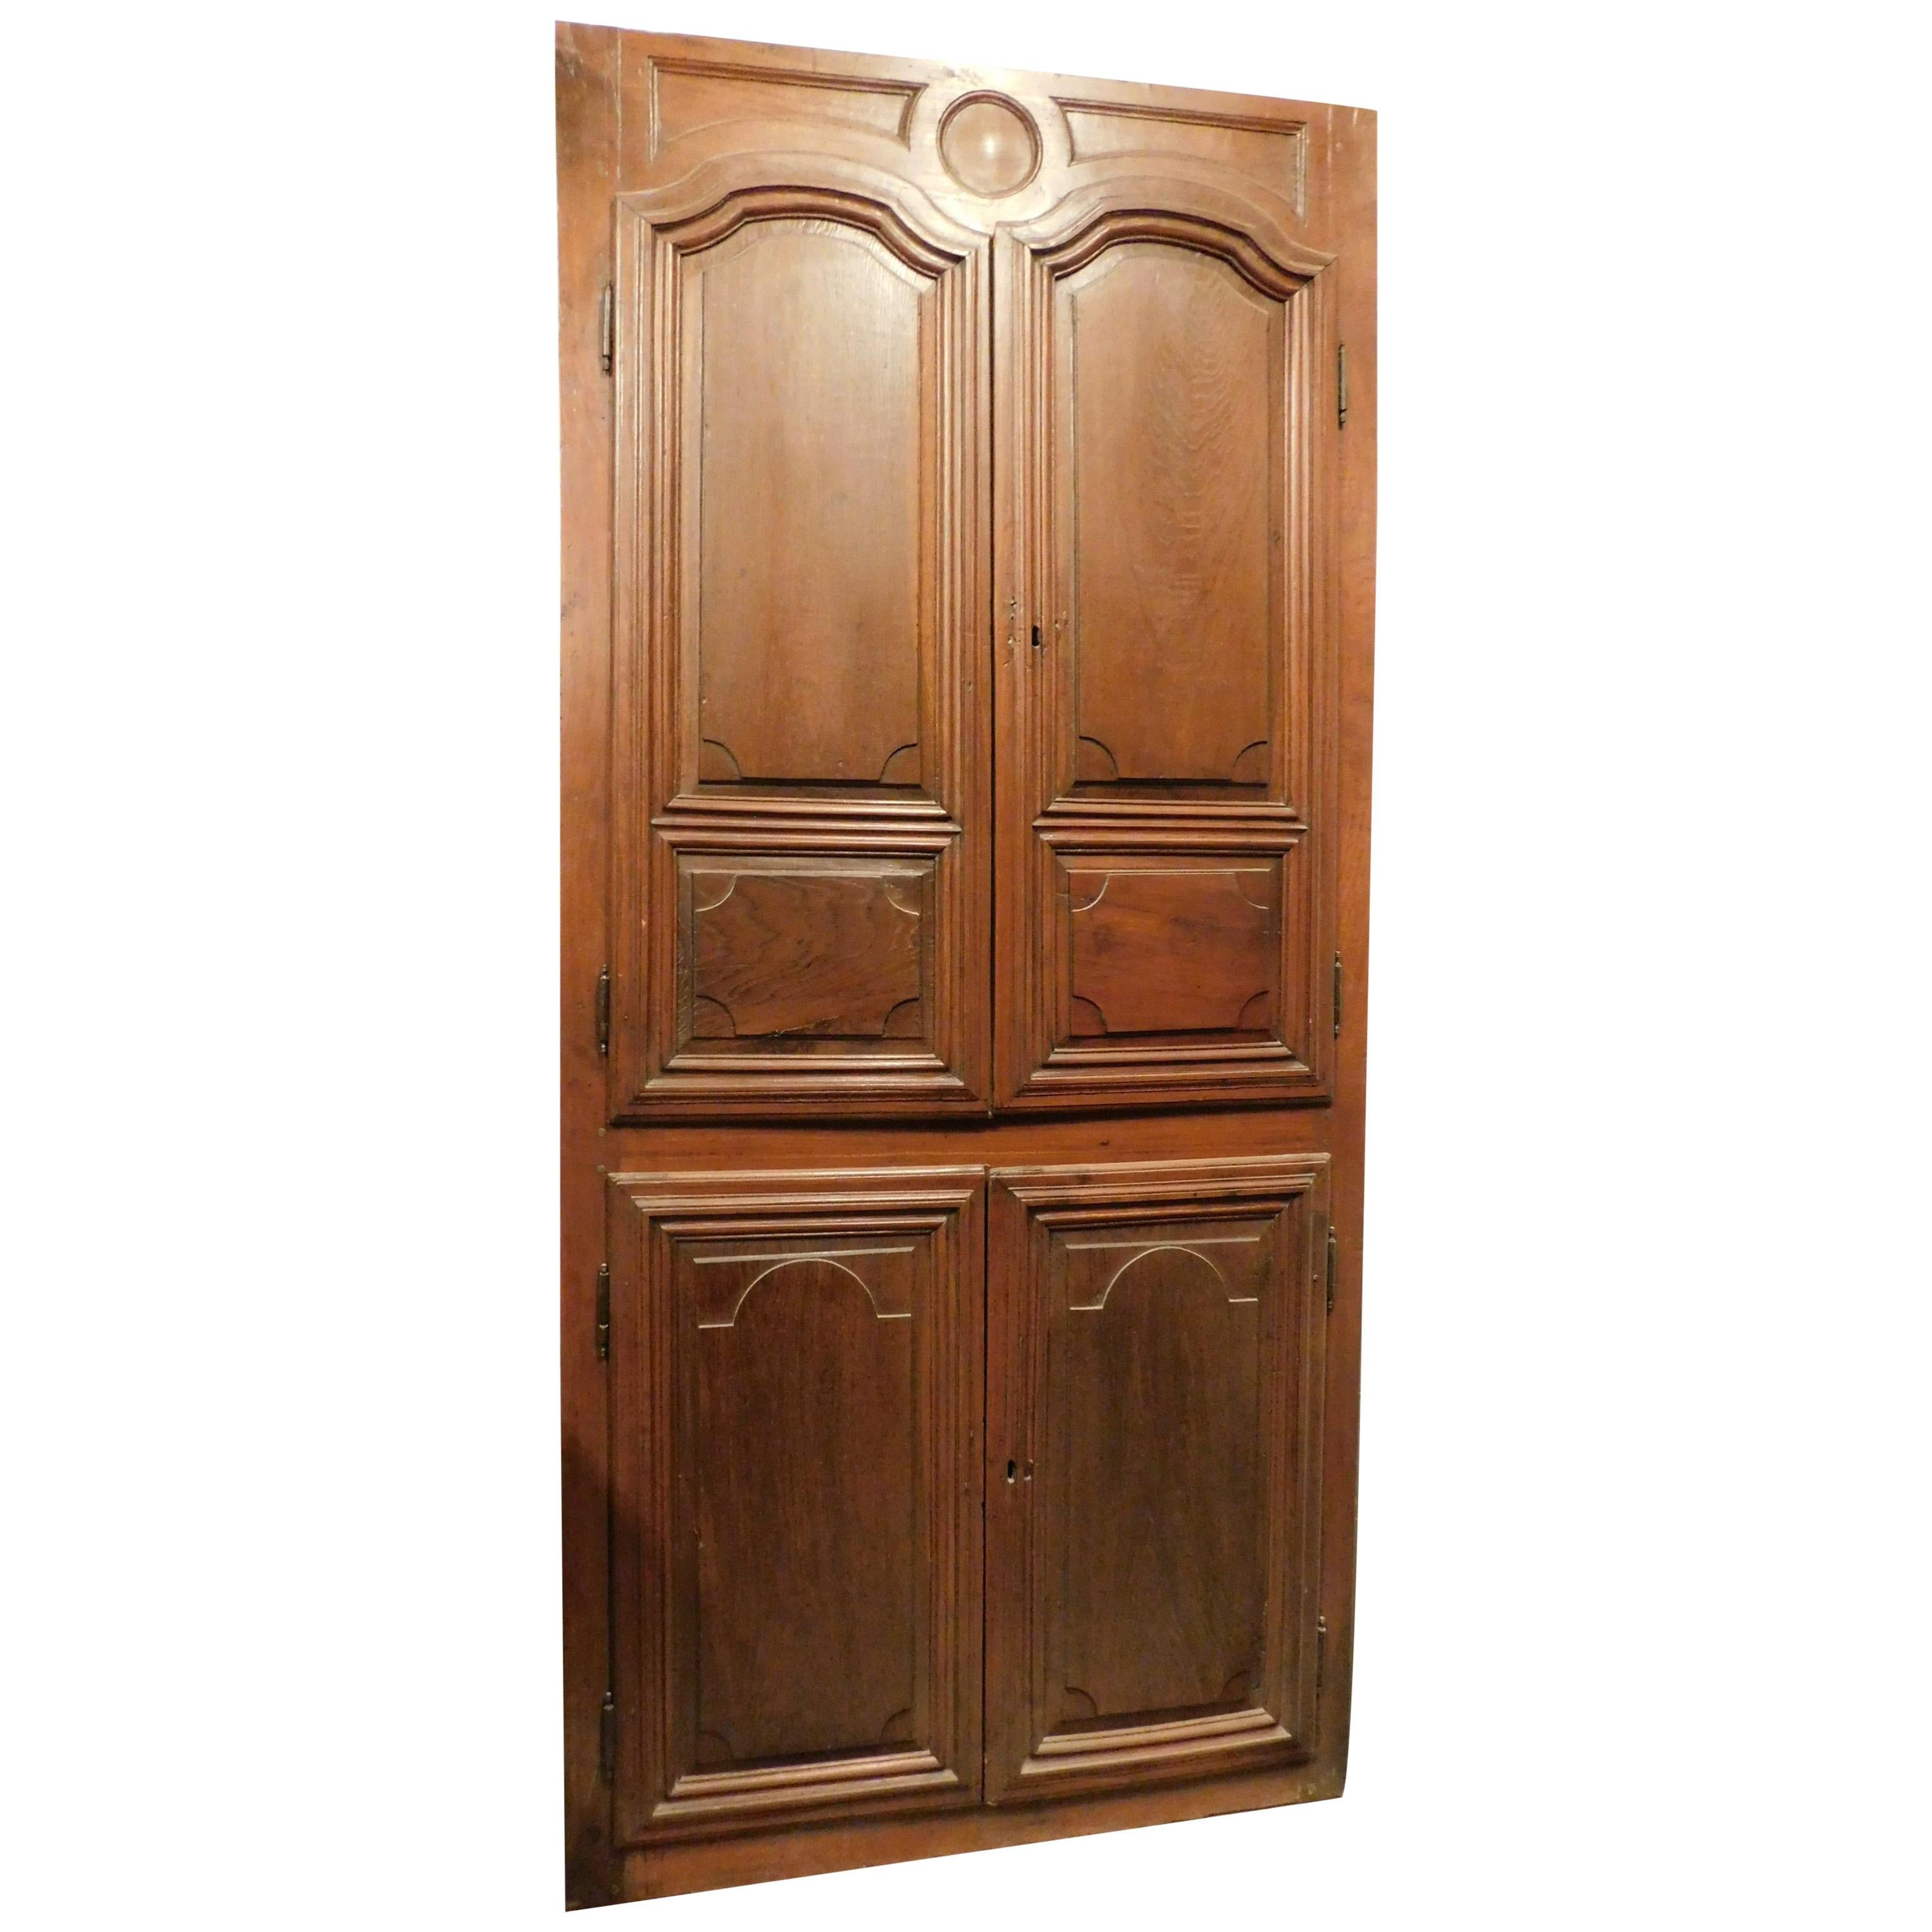 Antique Wall Cabinet Door Placard Carved Walnut, Four Doors, 18th Century, Italy